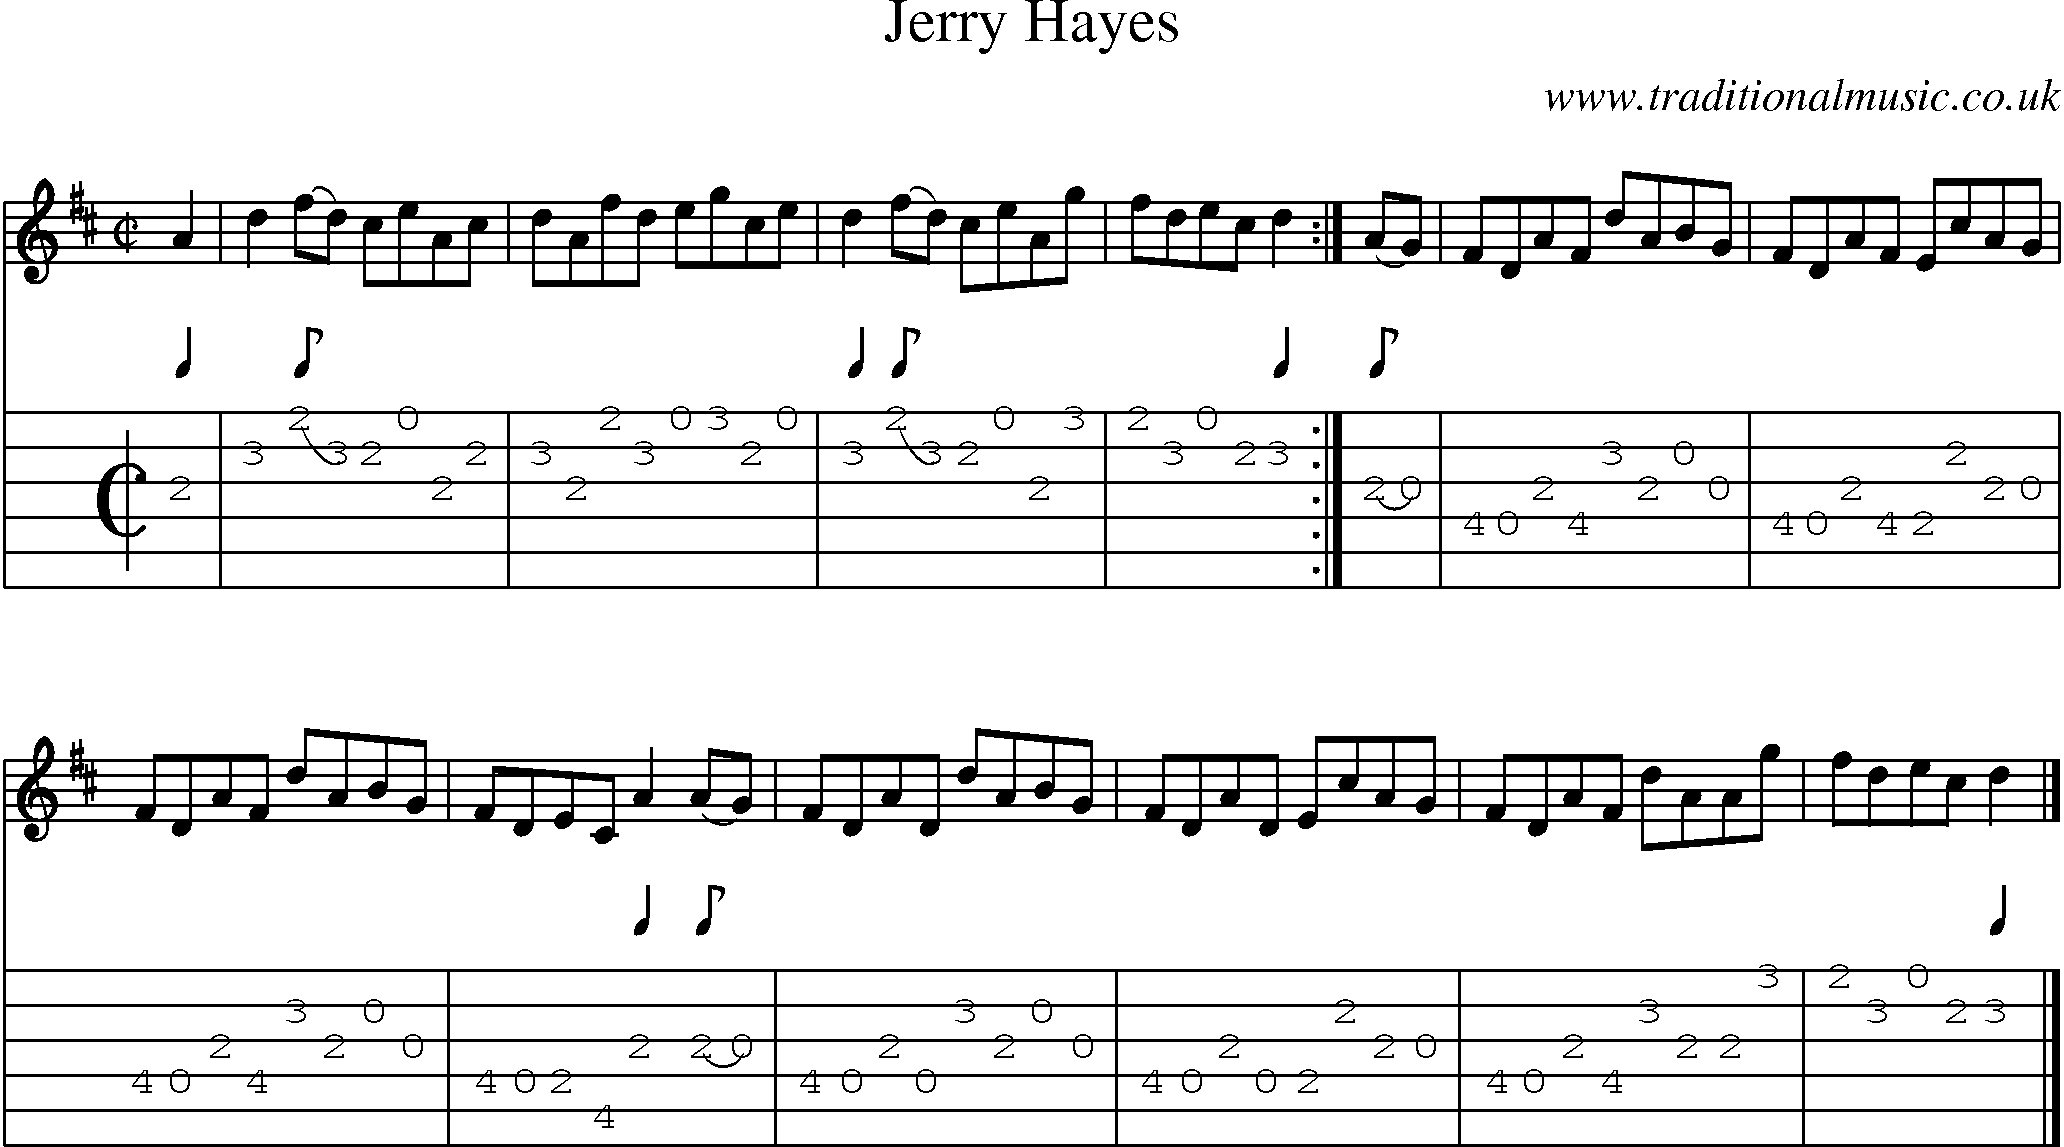 Music Score and Guitar Tabs for Jerry Hayes